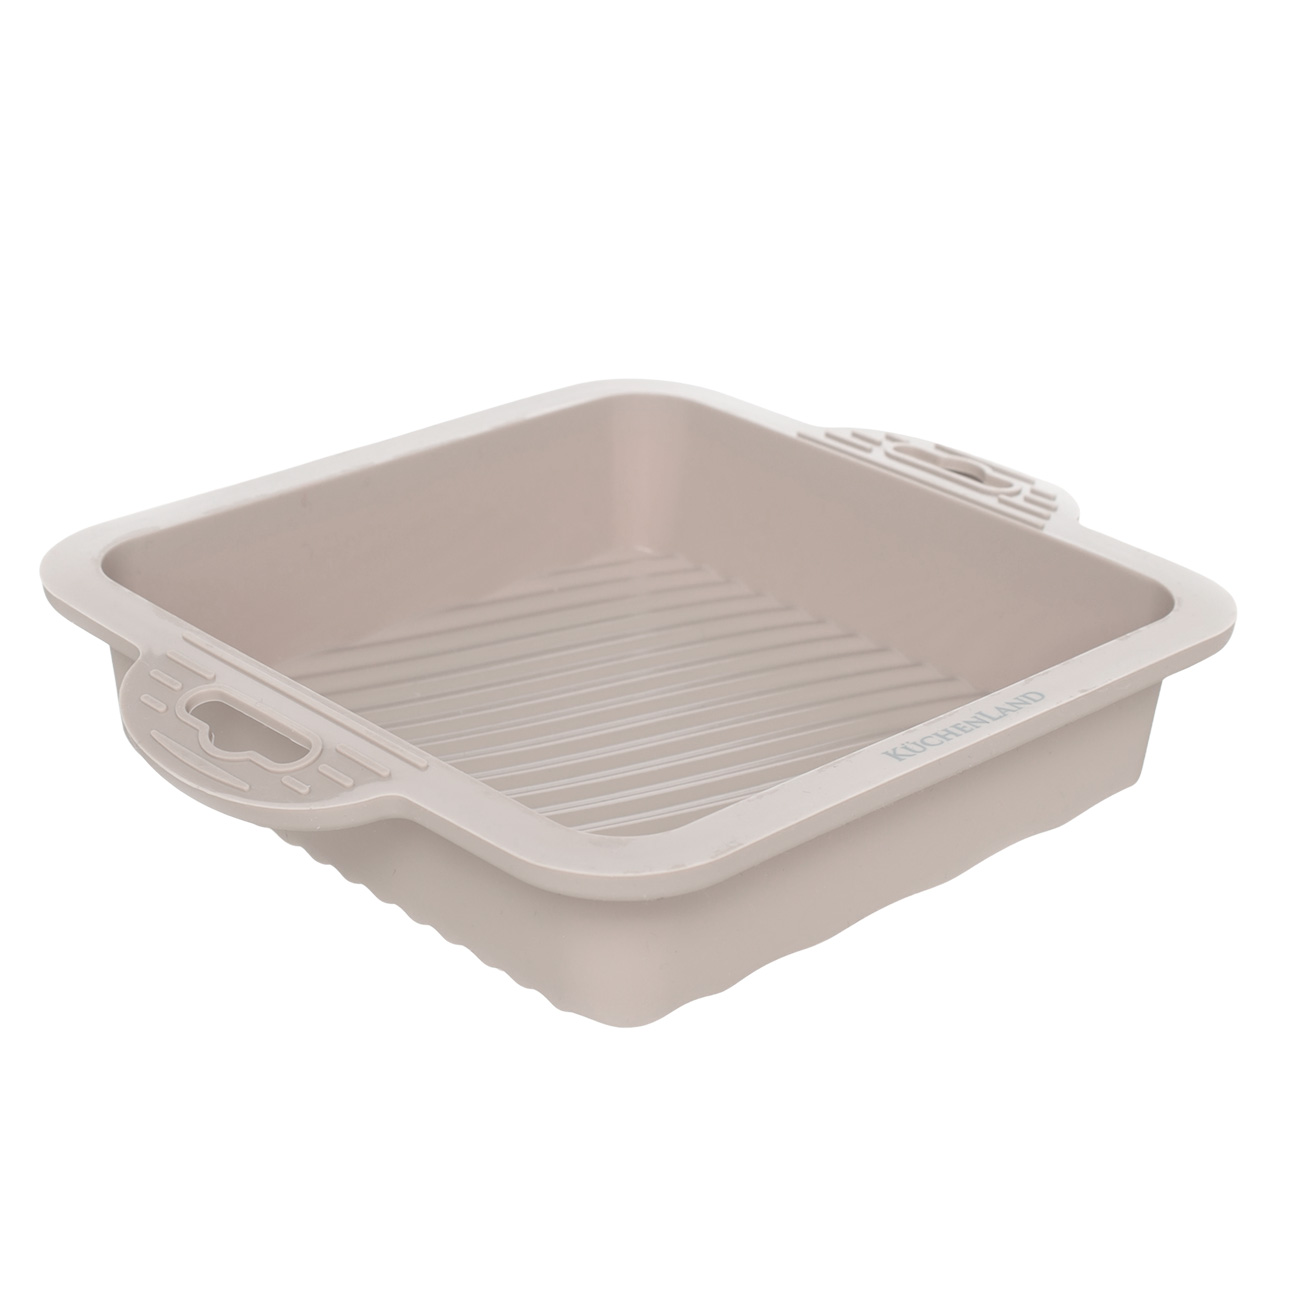 Baking dish, 22x18 cm, with handles, silicone, square, gray-brown, Bakery изображение № 2